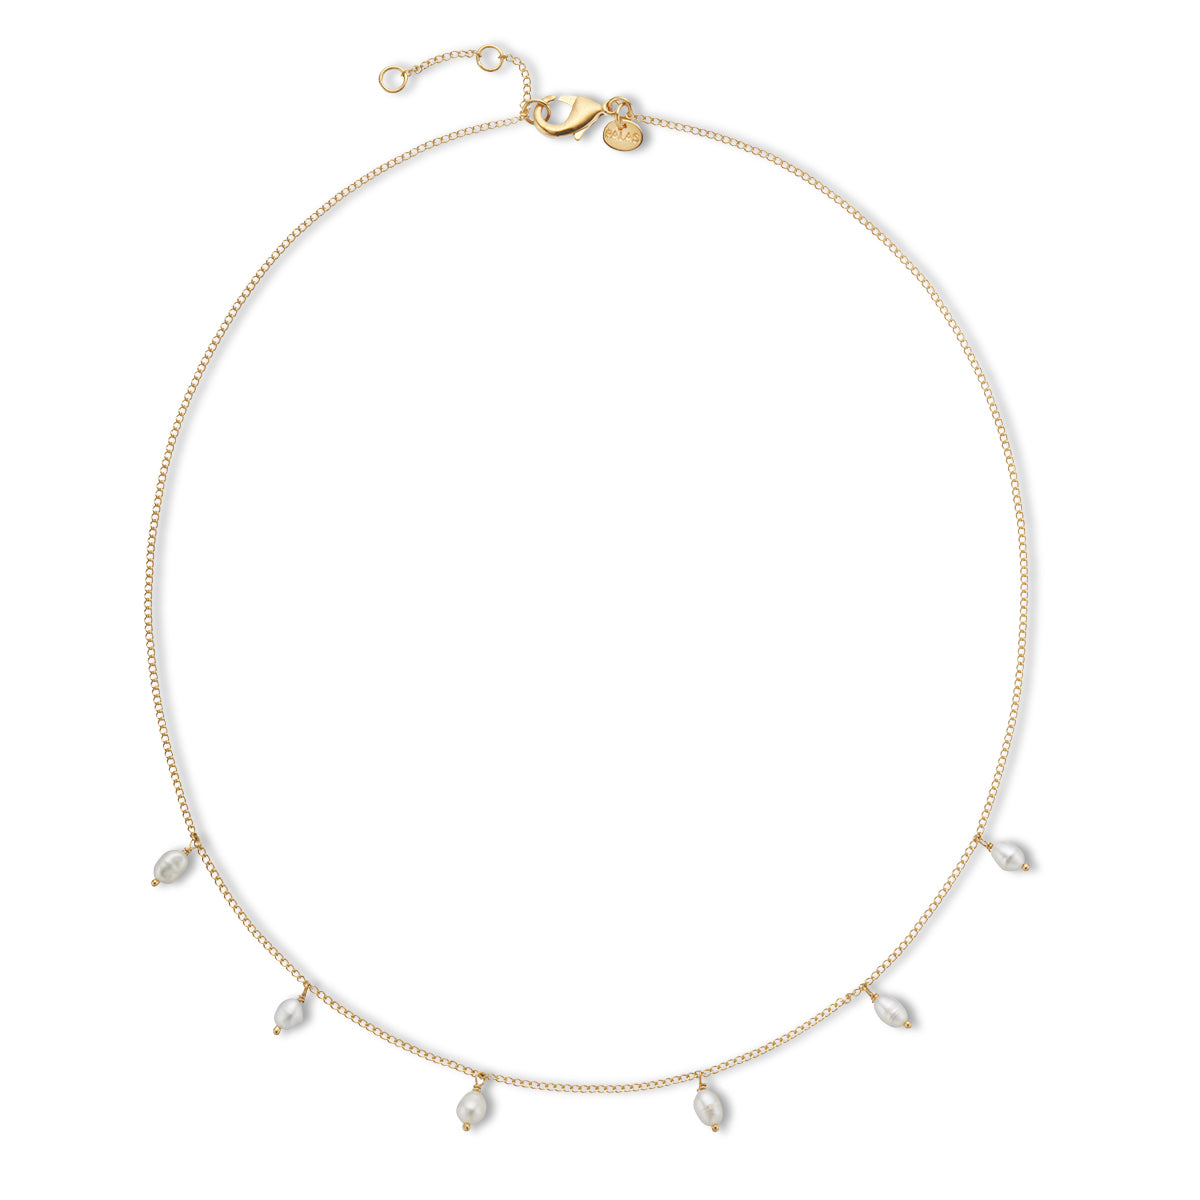 Positano pearl and chain necklace 18k gold plated